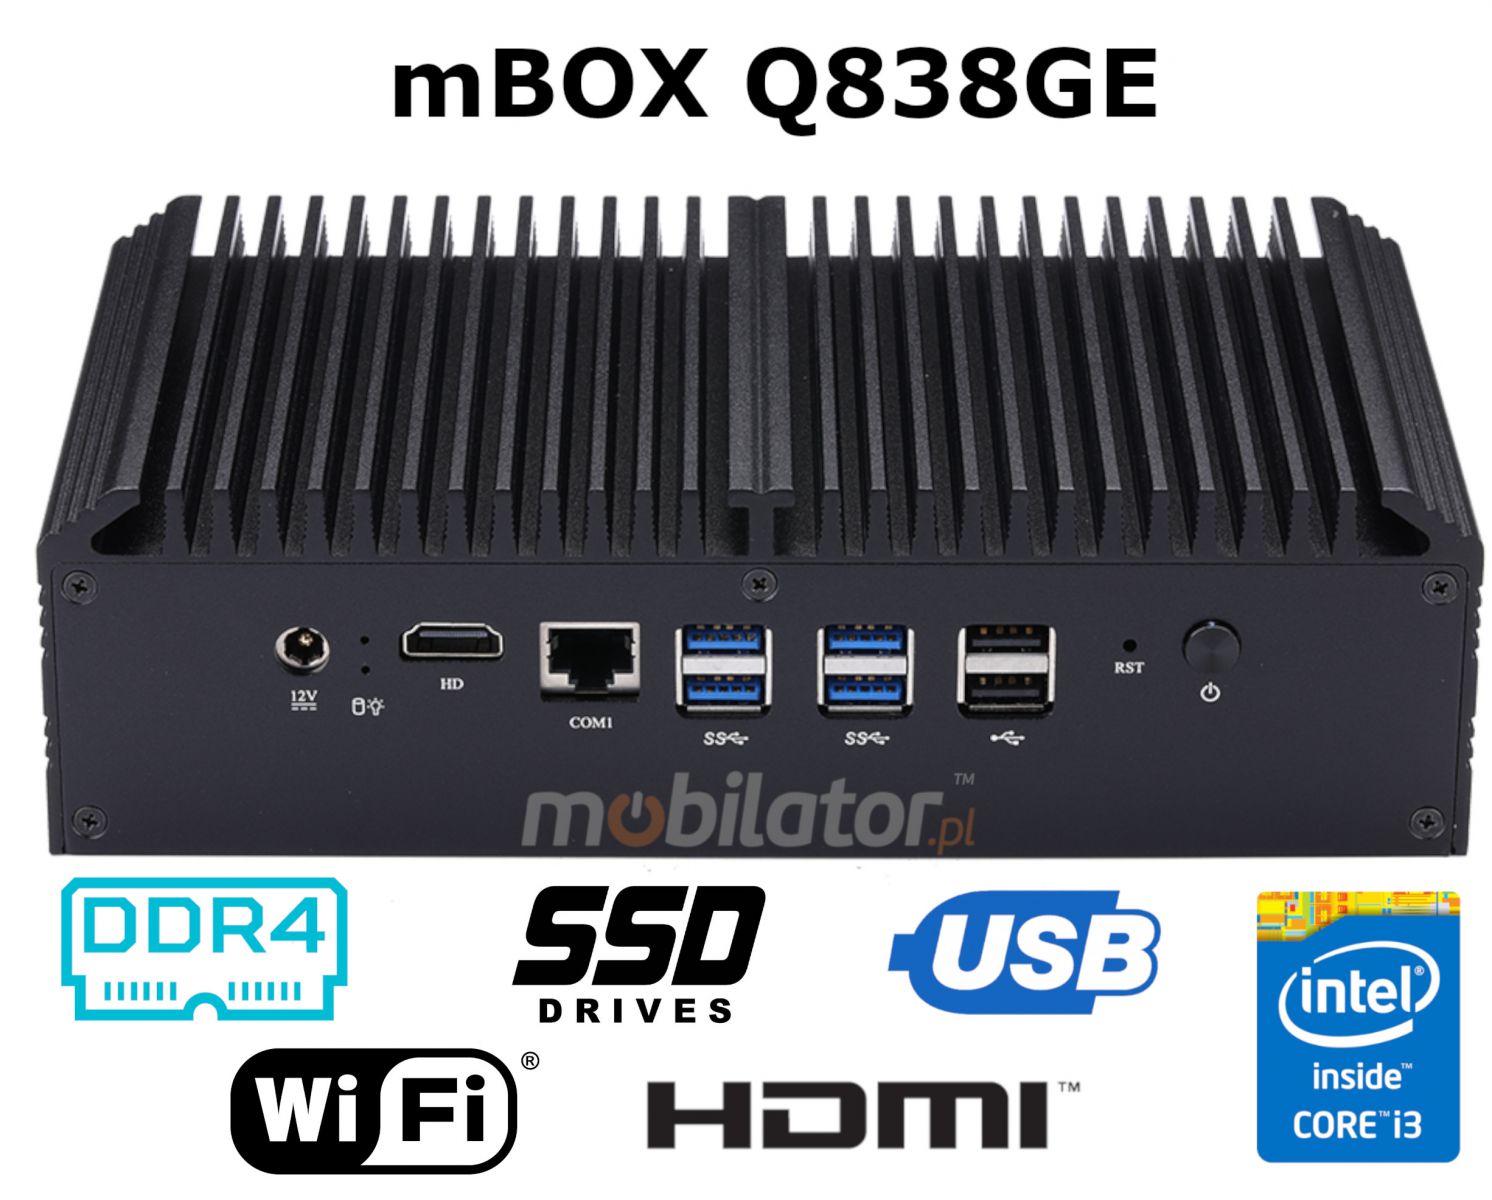 mBOX Q838GE v. 1 with RAM and SSD